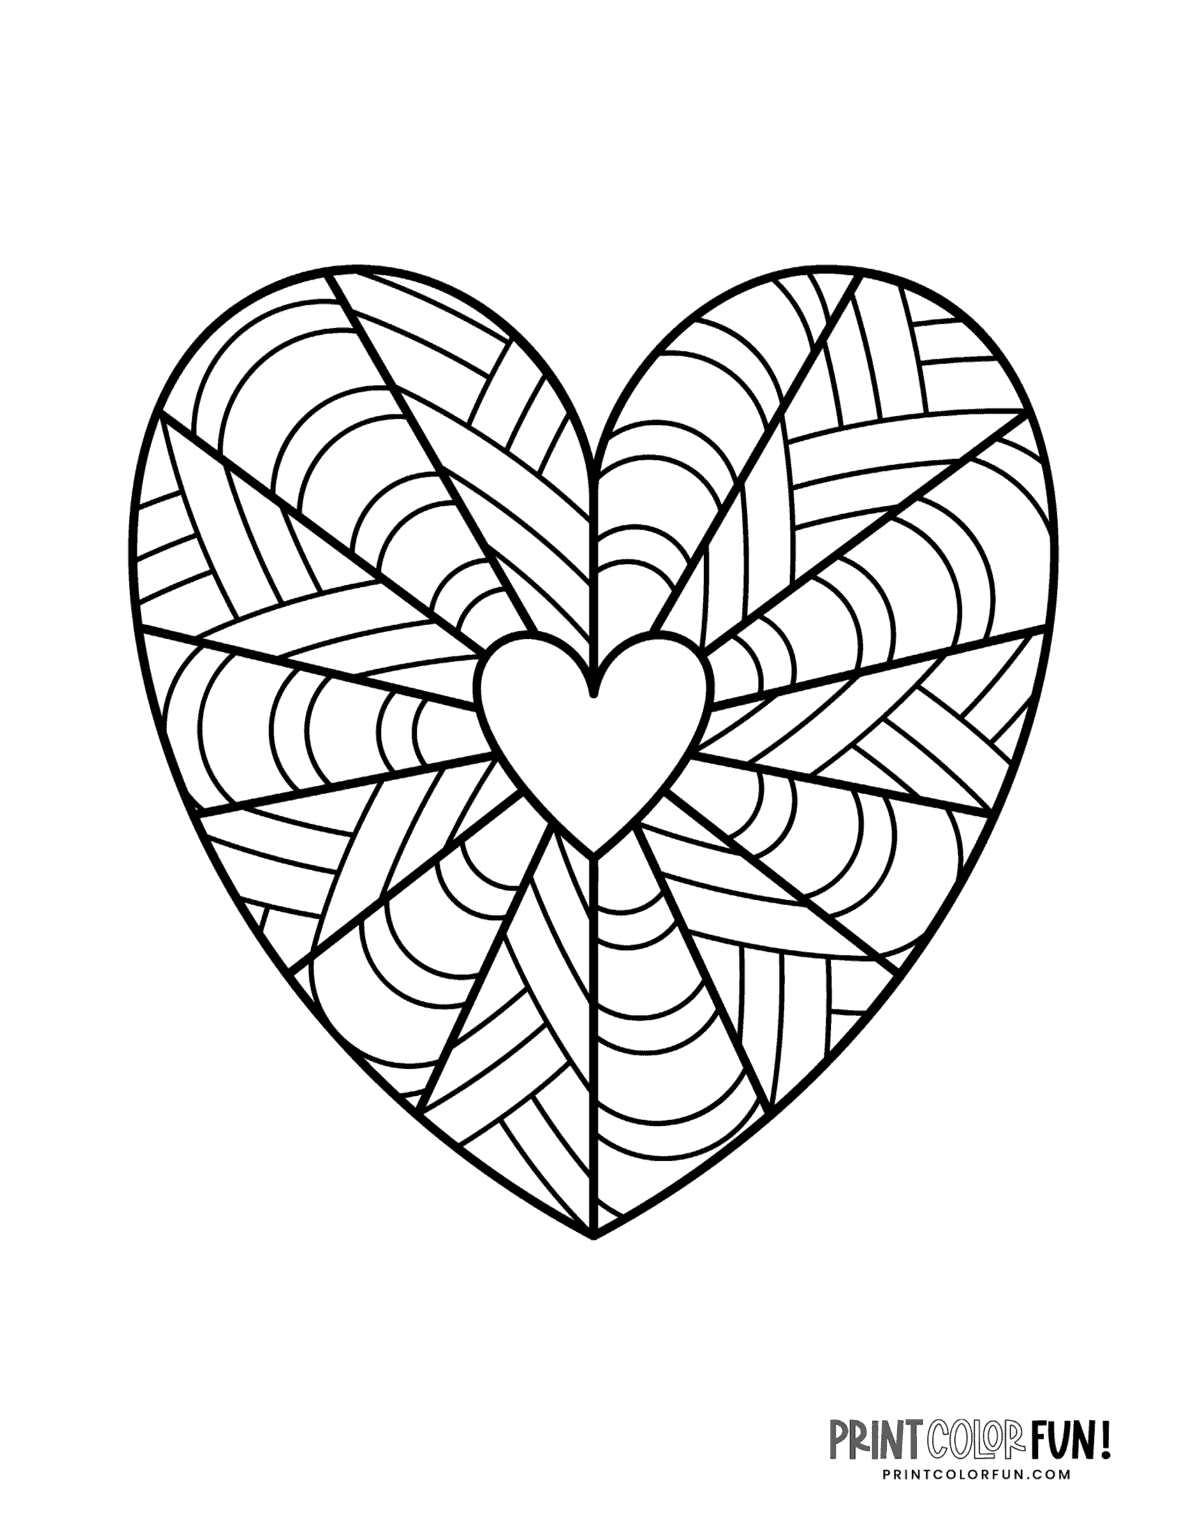 100 Heart Coloring Pages A Huge Collection Of Free Valentine s Day Printables Print Color Fun 